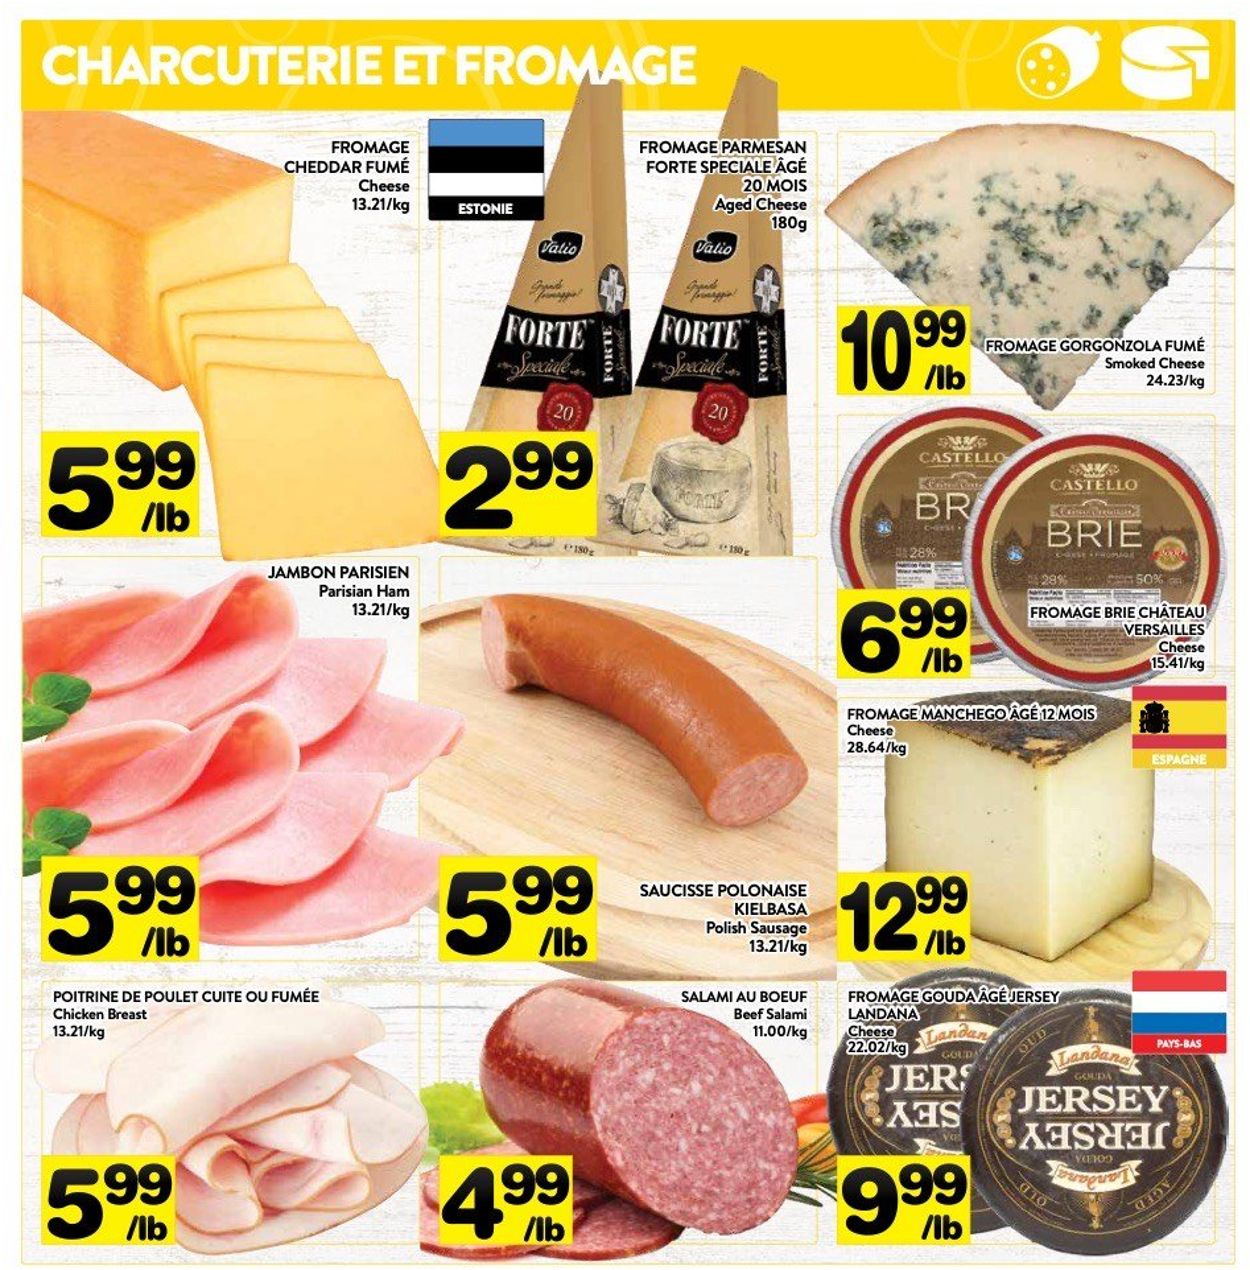 PA Supermarché Flyer from 06/14/2021